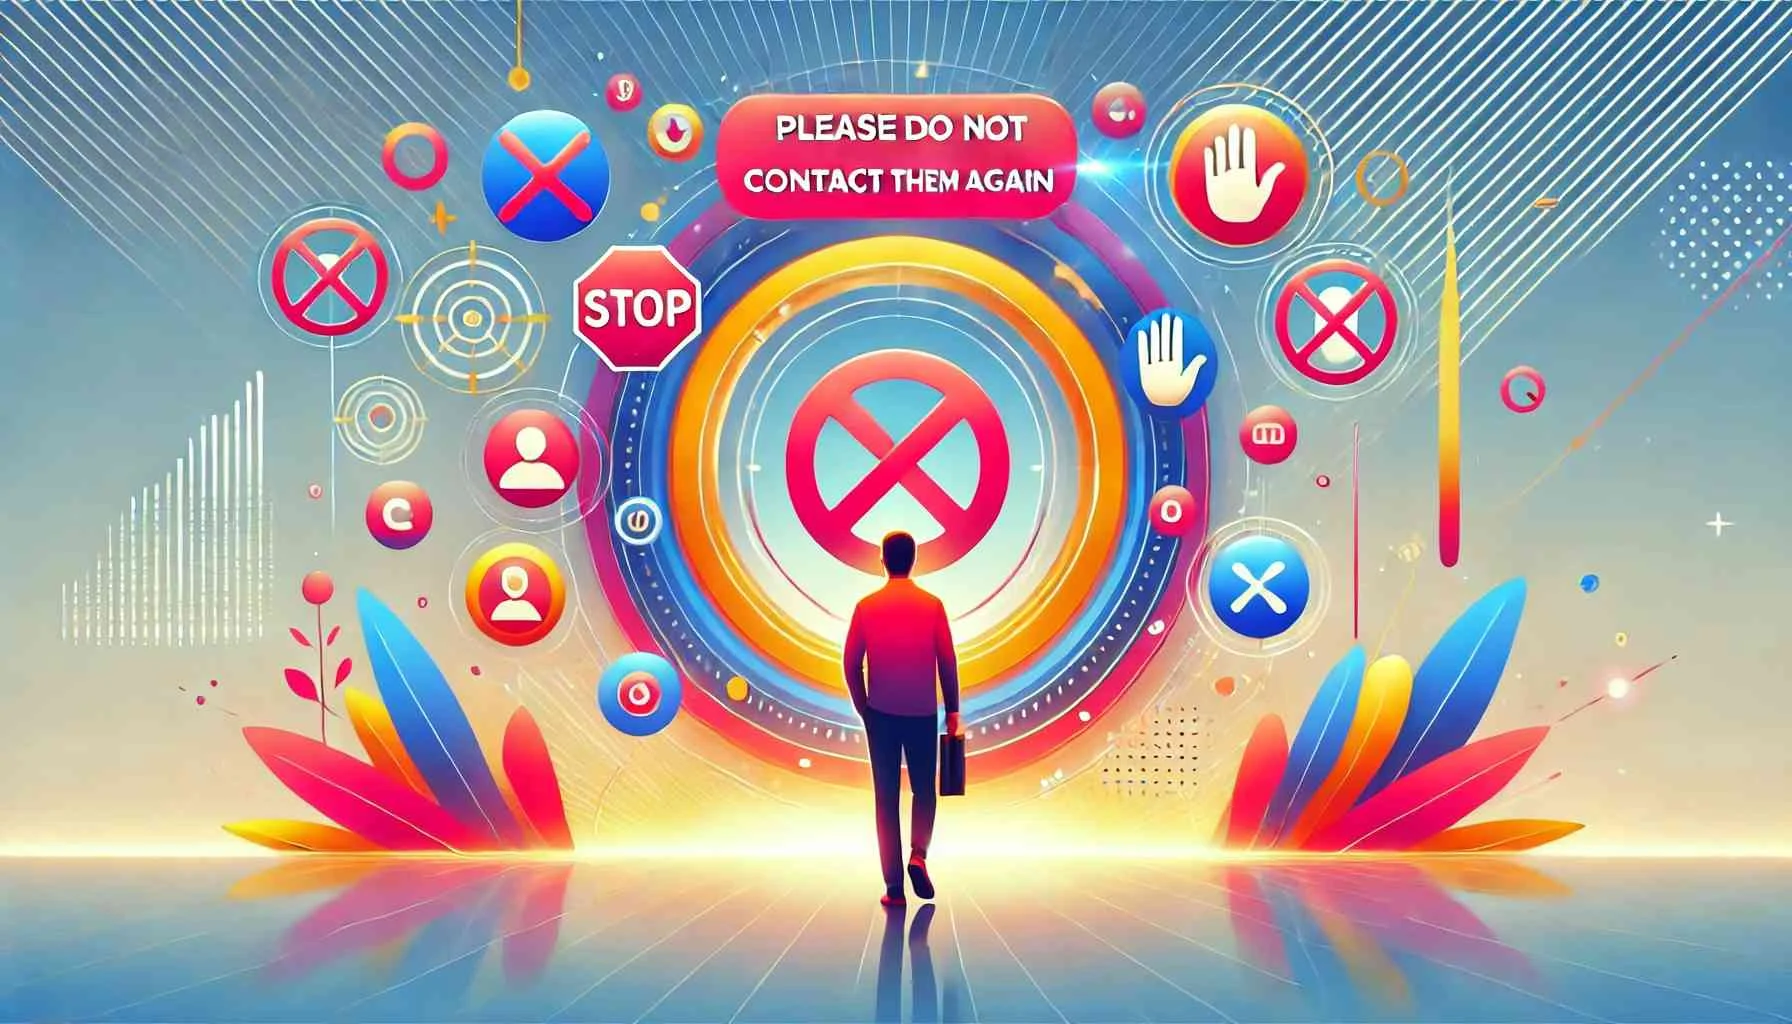 Themed Illustration Depicting The Concept Of Please Do Not Contact Them Again. The Image Should Use Vibrant And Mo 20240714